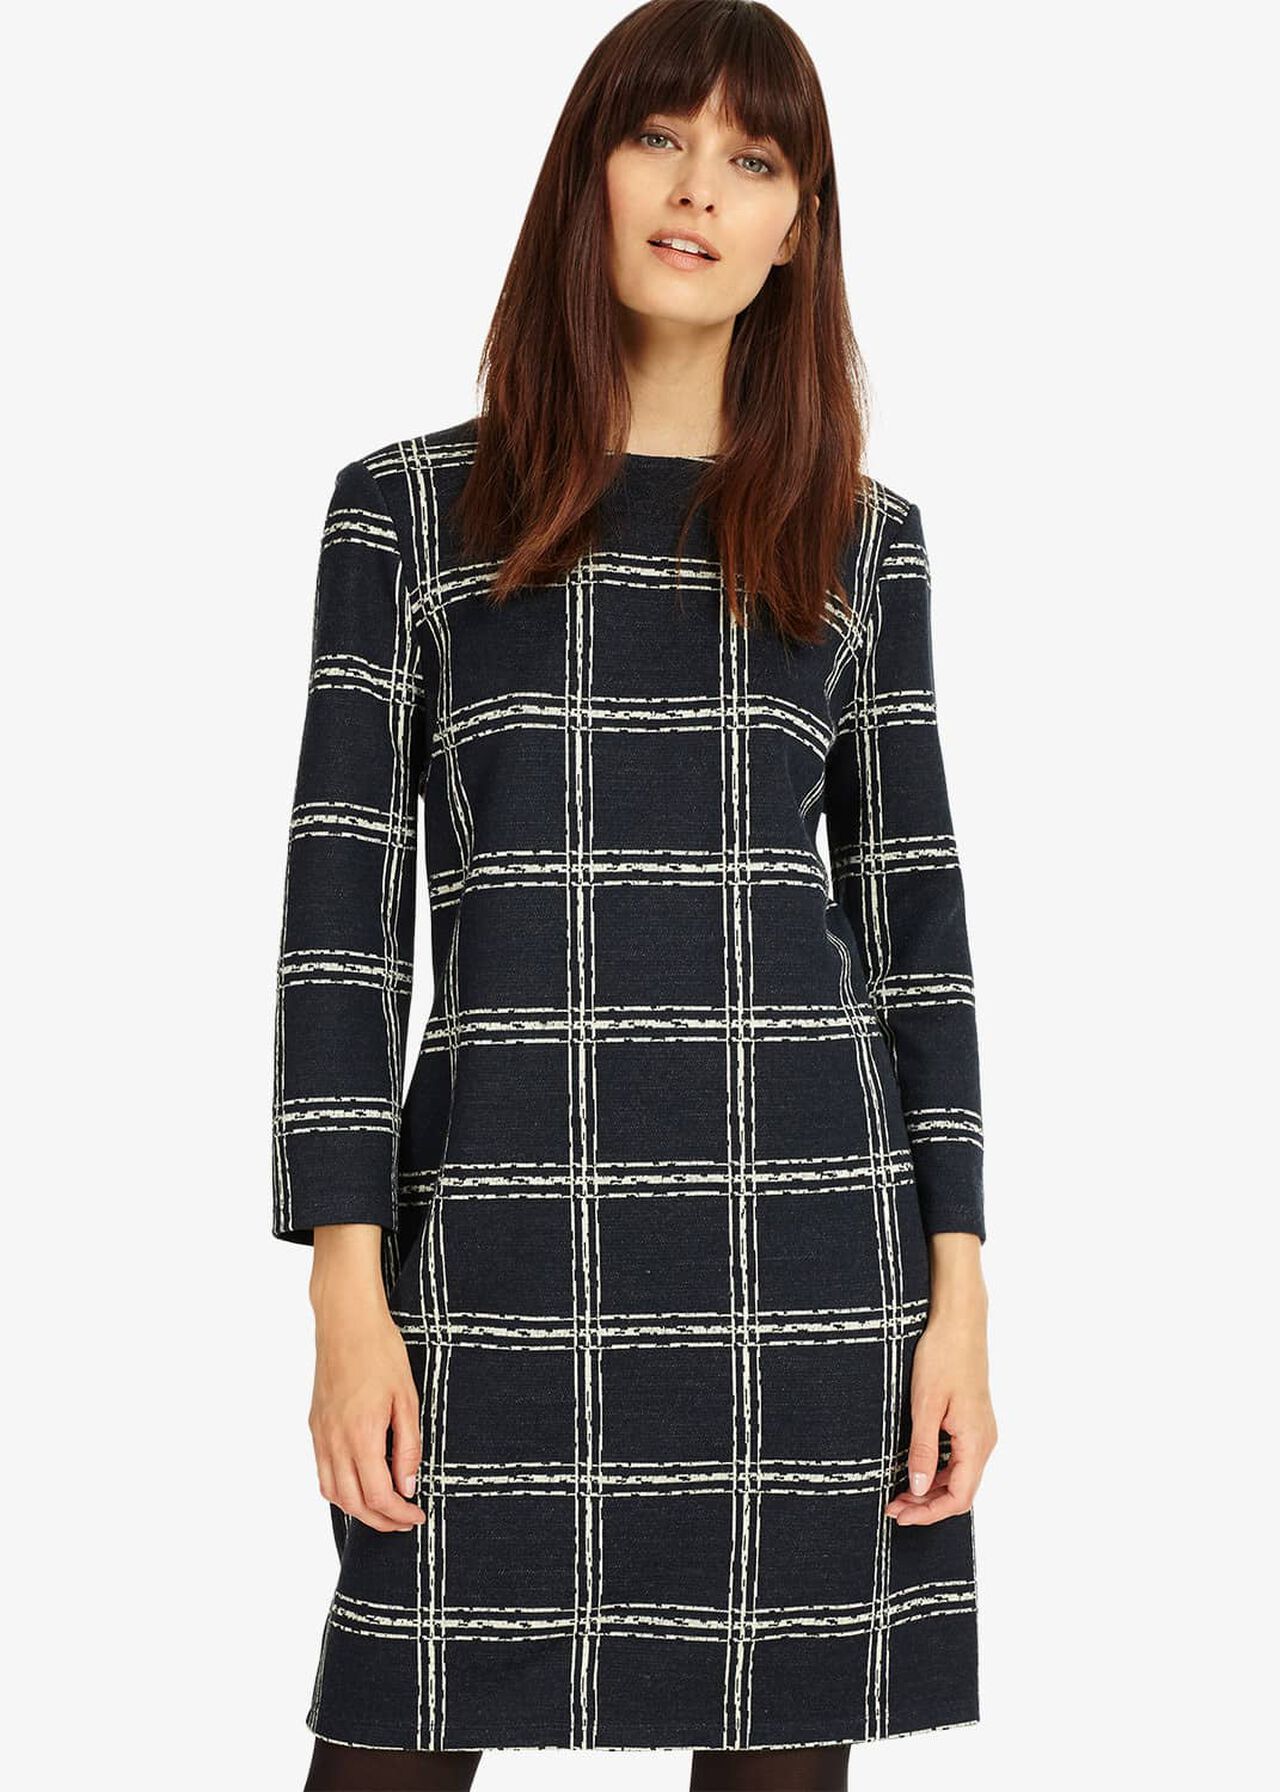 Sybil Sketched Check Tunic